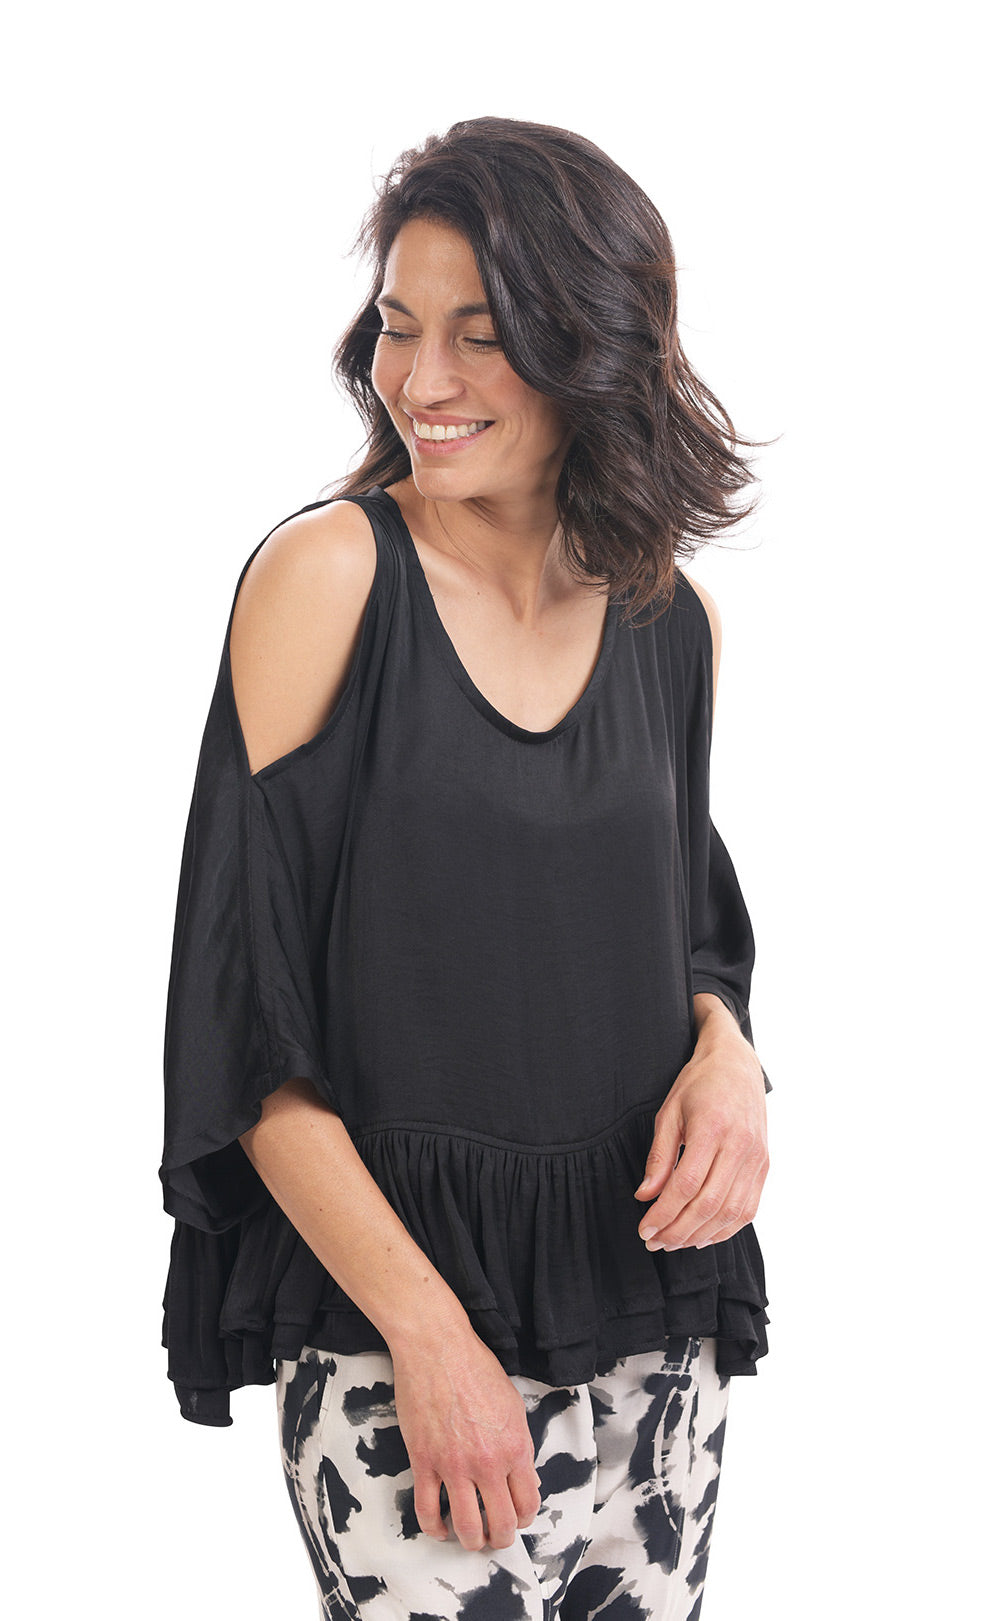 Front top half view of a woman wearing the rhys ruffle blouse in black. This top has a cold shoulder, a round neck, 3/4 length sleeves and a ruffled hem. On the bottom the woman is wearing black and white printed pants.